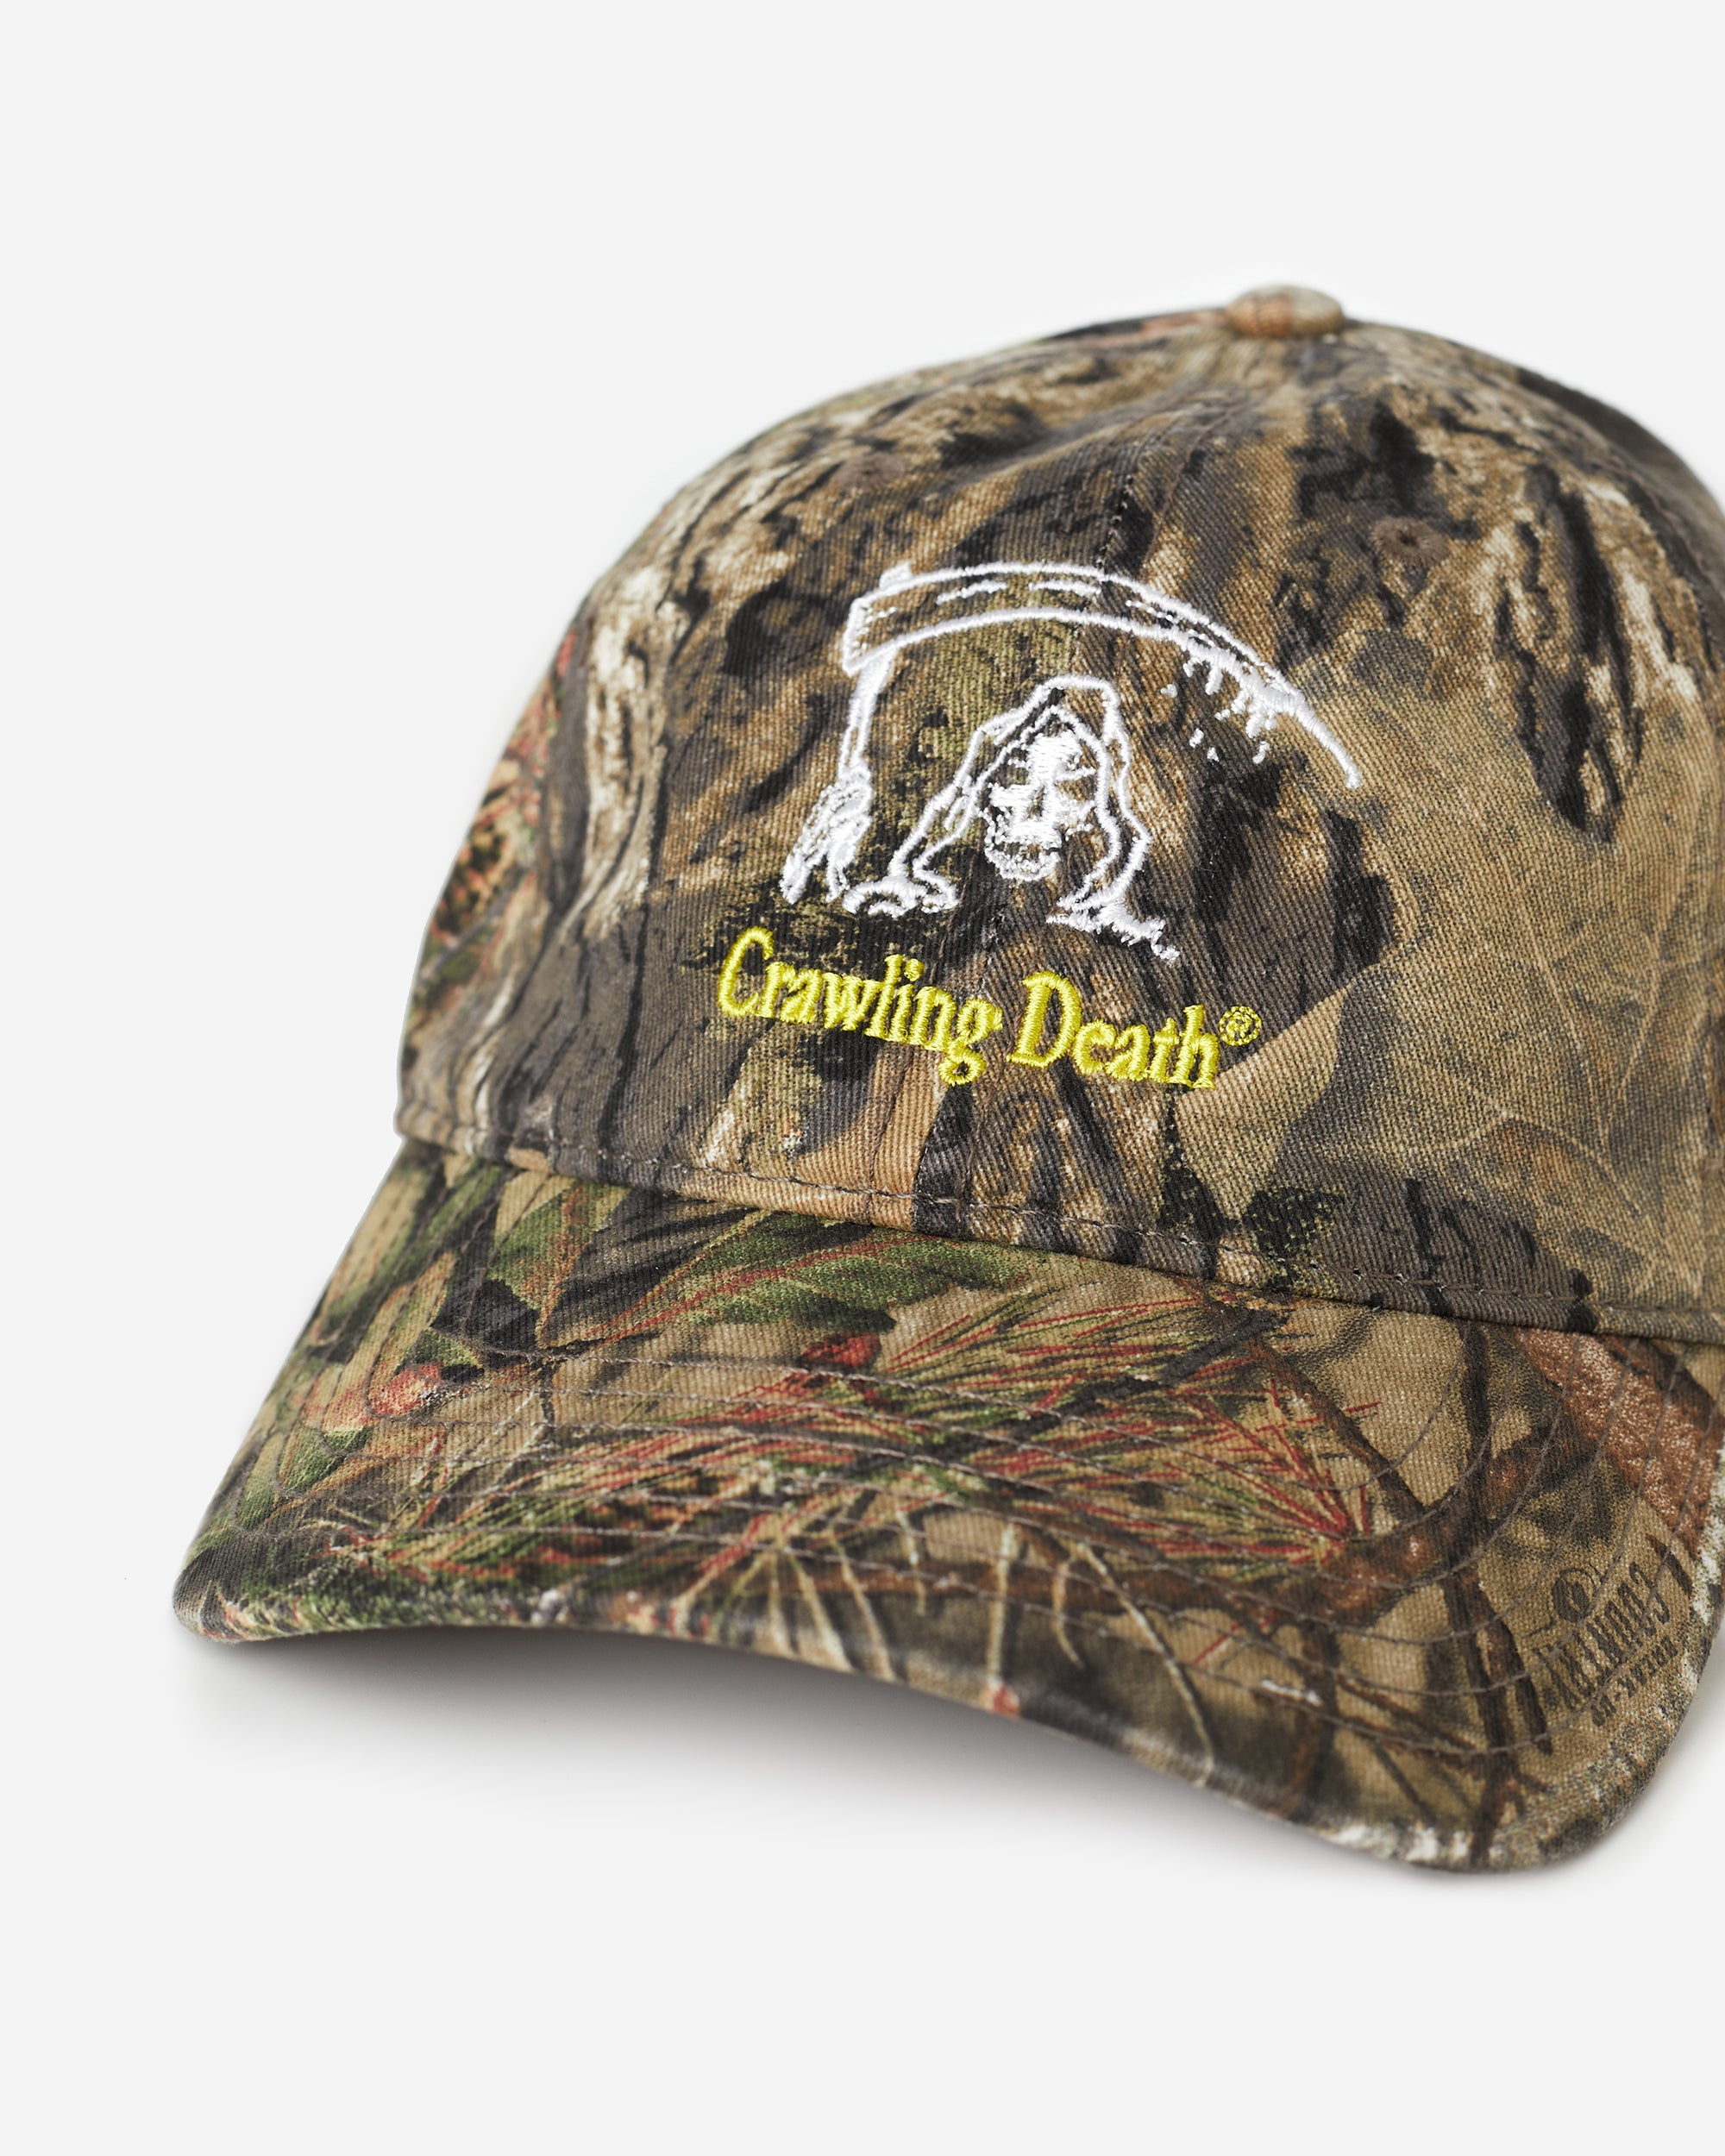 Port Authority Pro Camouflage Series Cap, Product